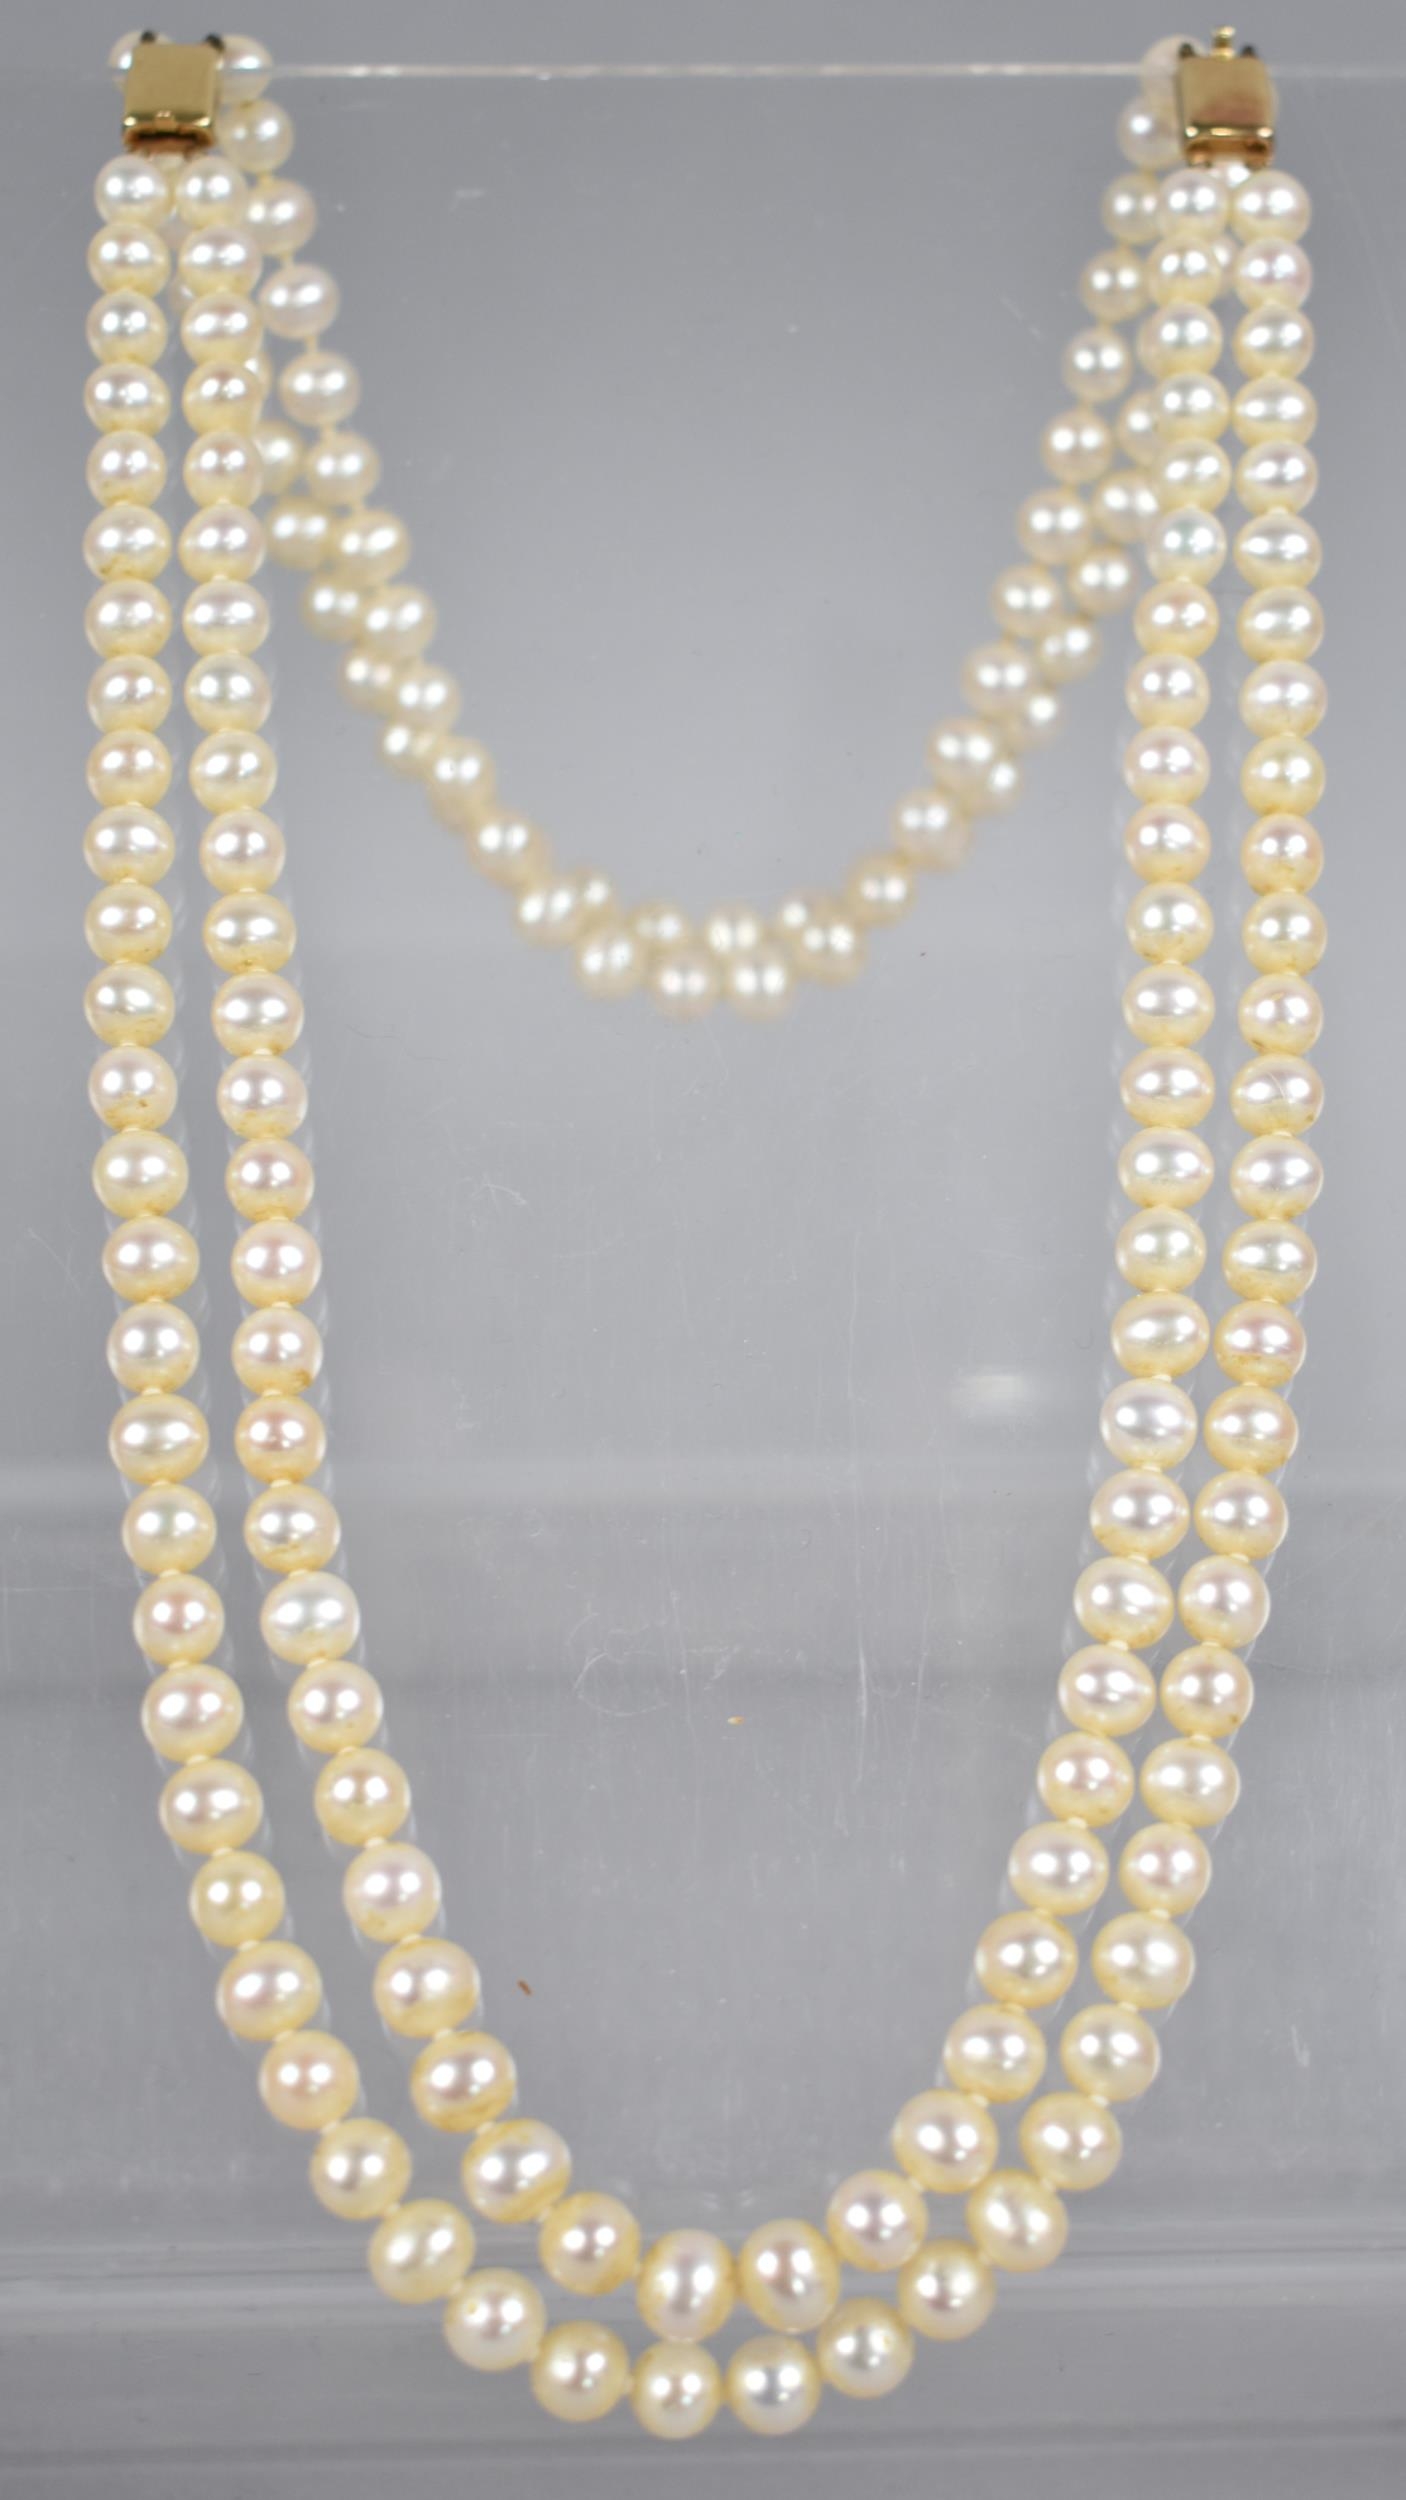 A Two Row Pearl Necklace with 18ct Gold Clasp By JKa Kohle with Additional Two Row Extender, Matched